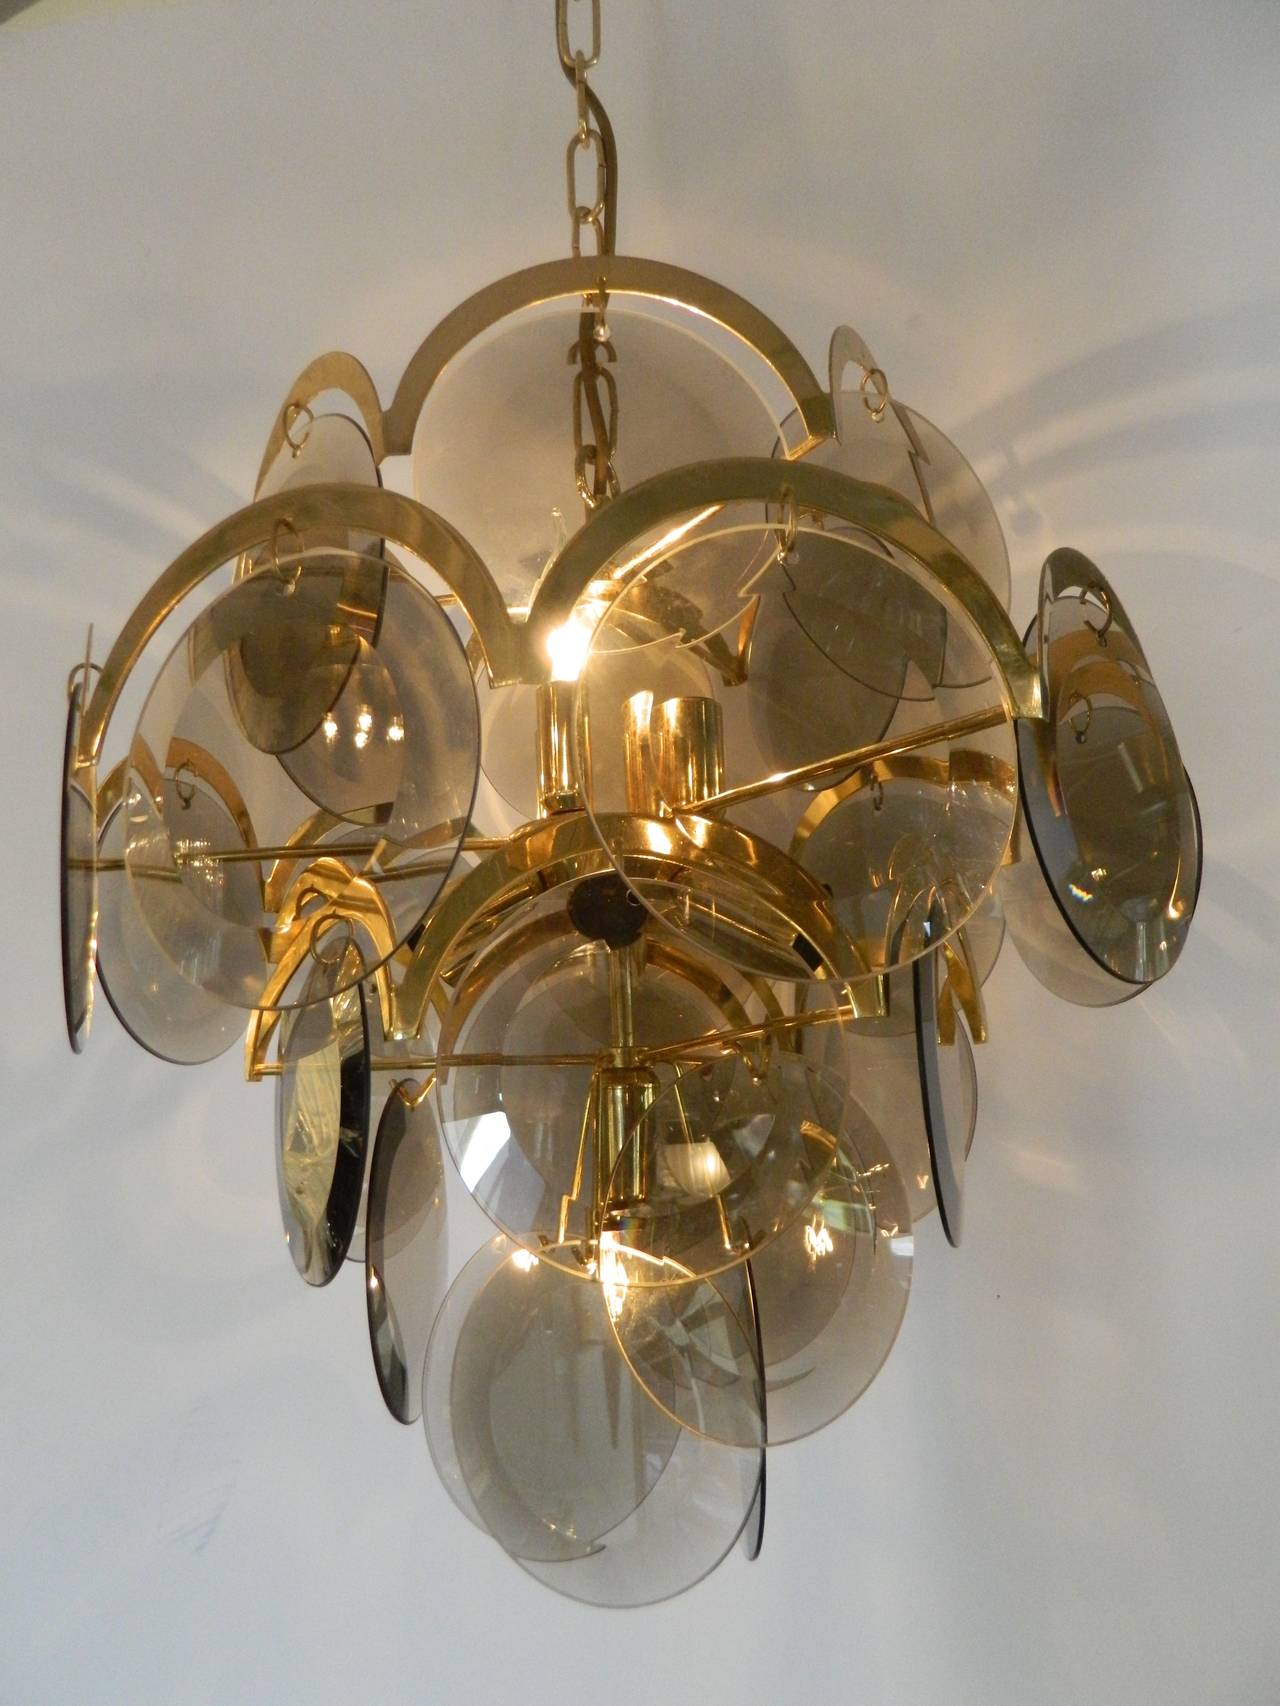 Murano glass seven-light chandelier with smoke colored beveled edge discs on brass frame attributed to Vistosi. Made in Italy in 1970s.